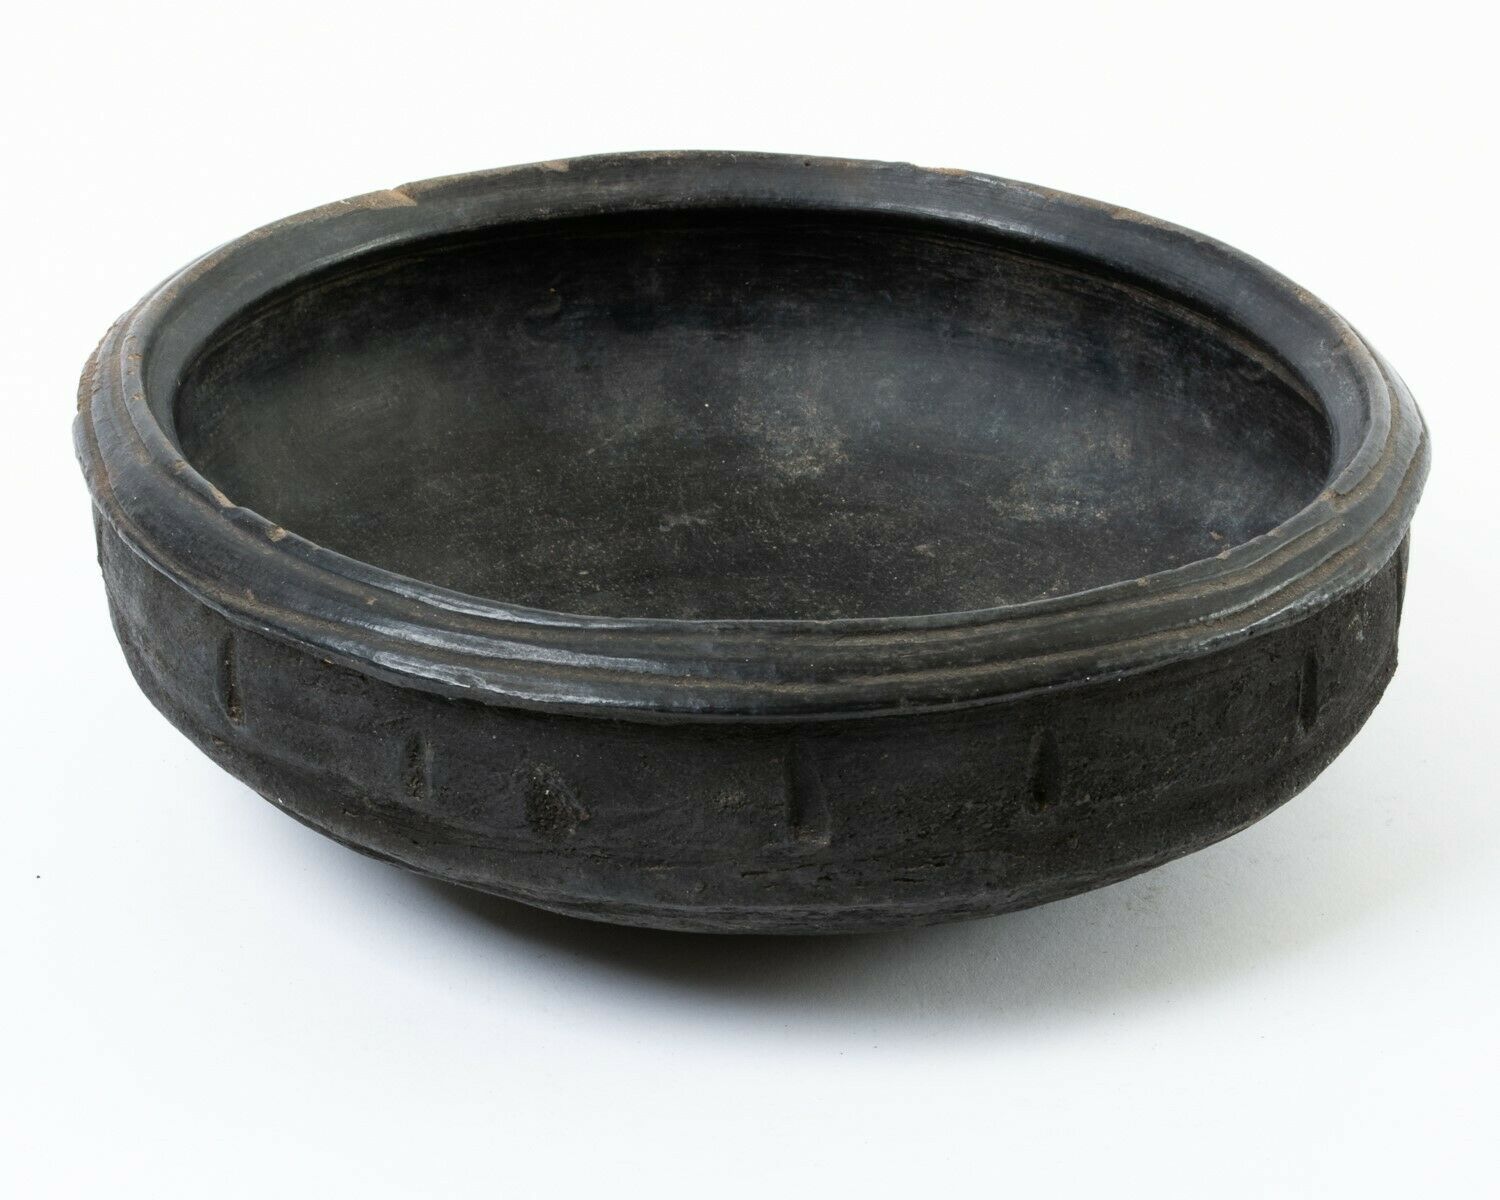 Antique Black Ceramic Pottery Cooking Vessel With Extensive Firing 10" Diameter